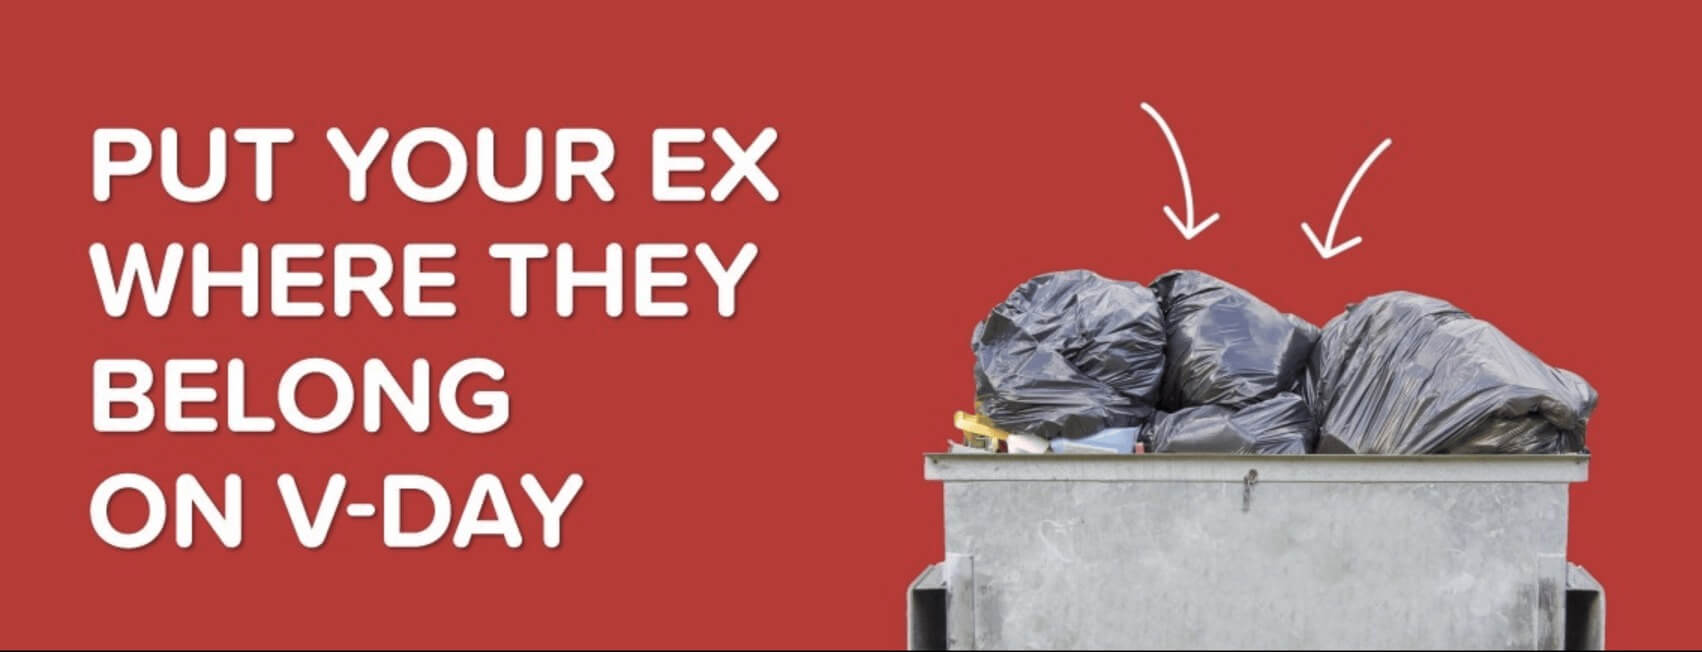 A screenshot from the Hotels.com website with the “Put your ex where they belong on a V-Day” text and an image of a dumpster